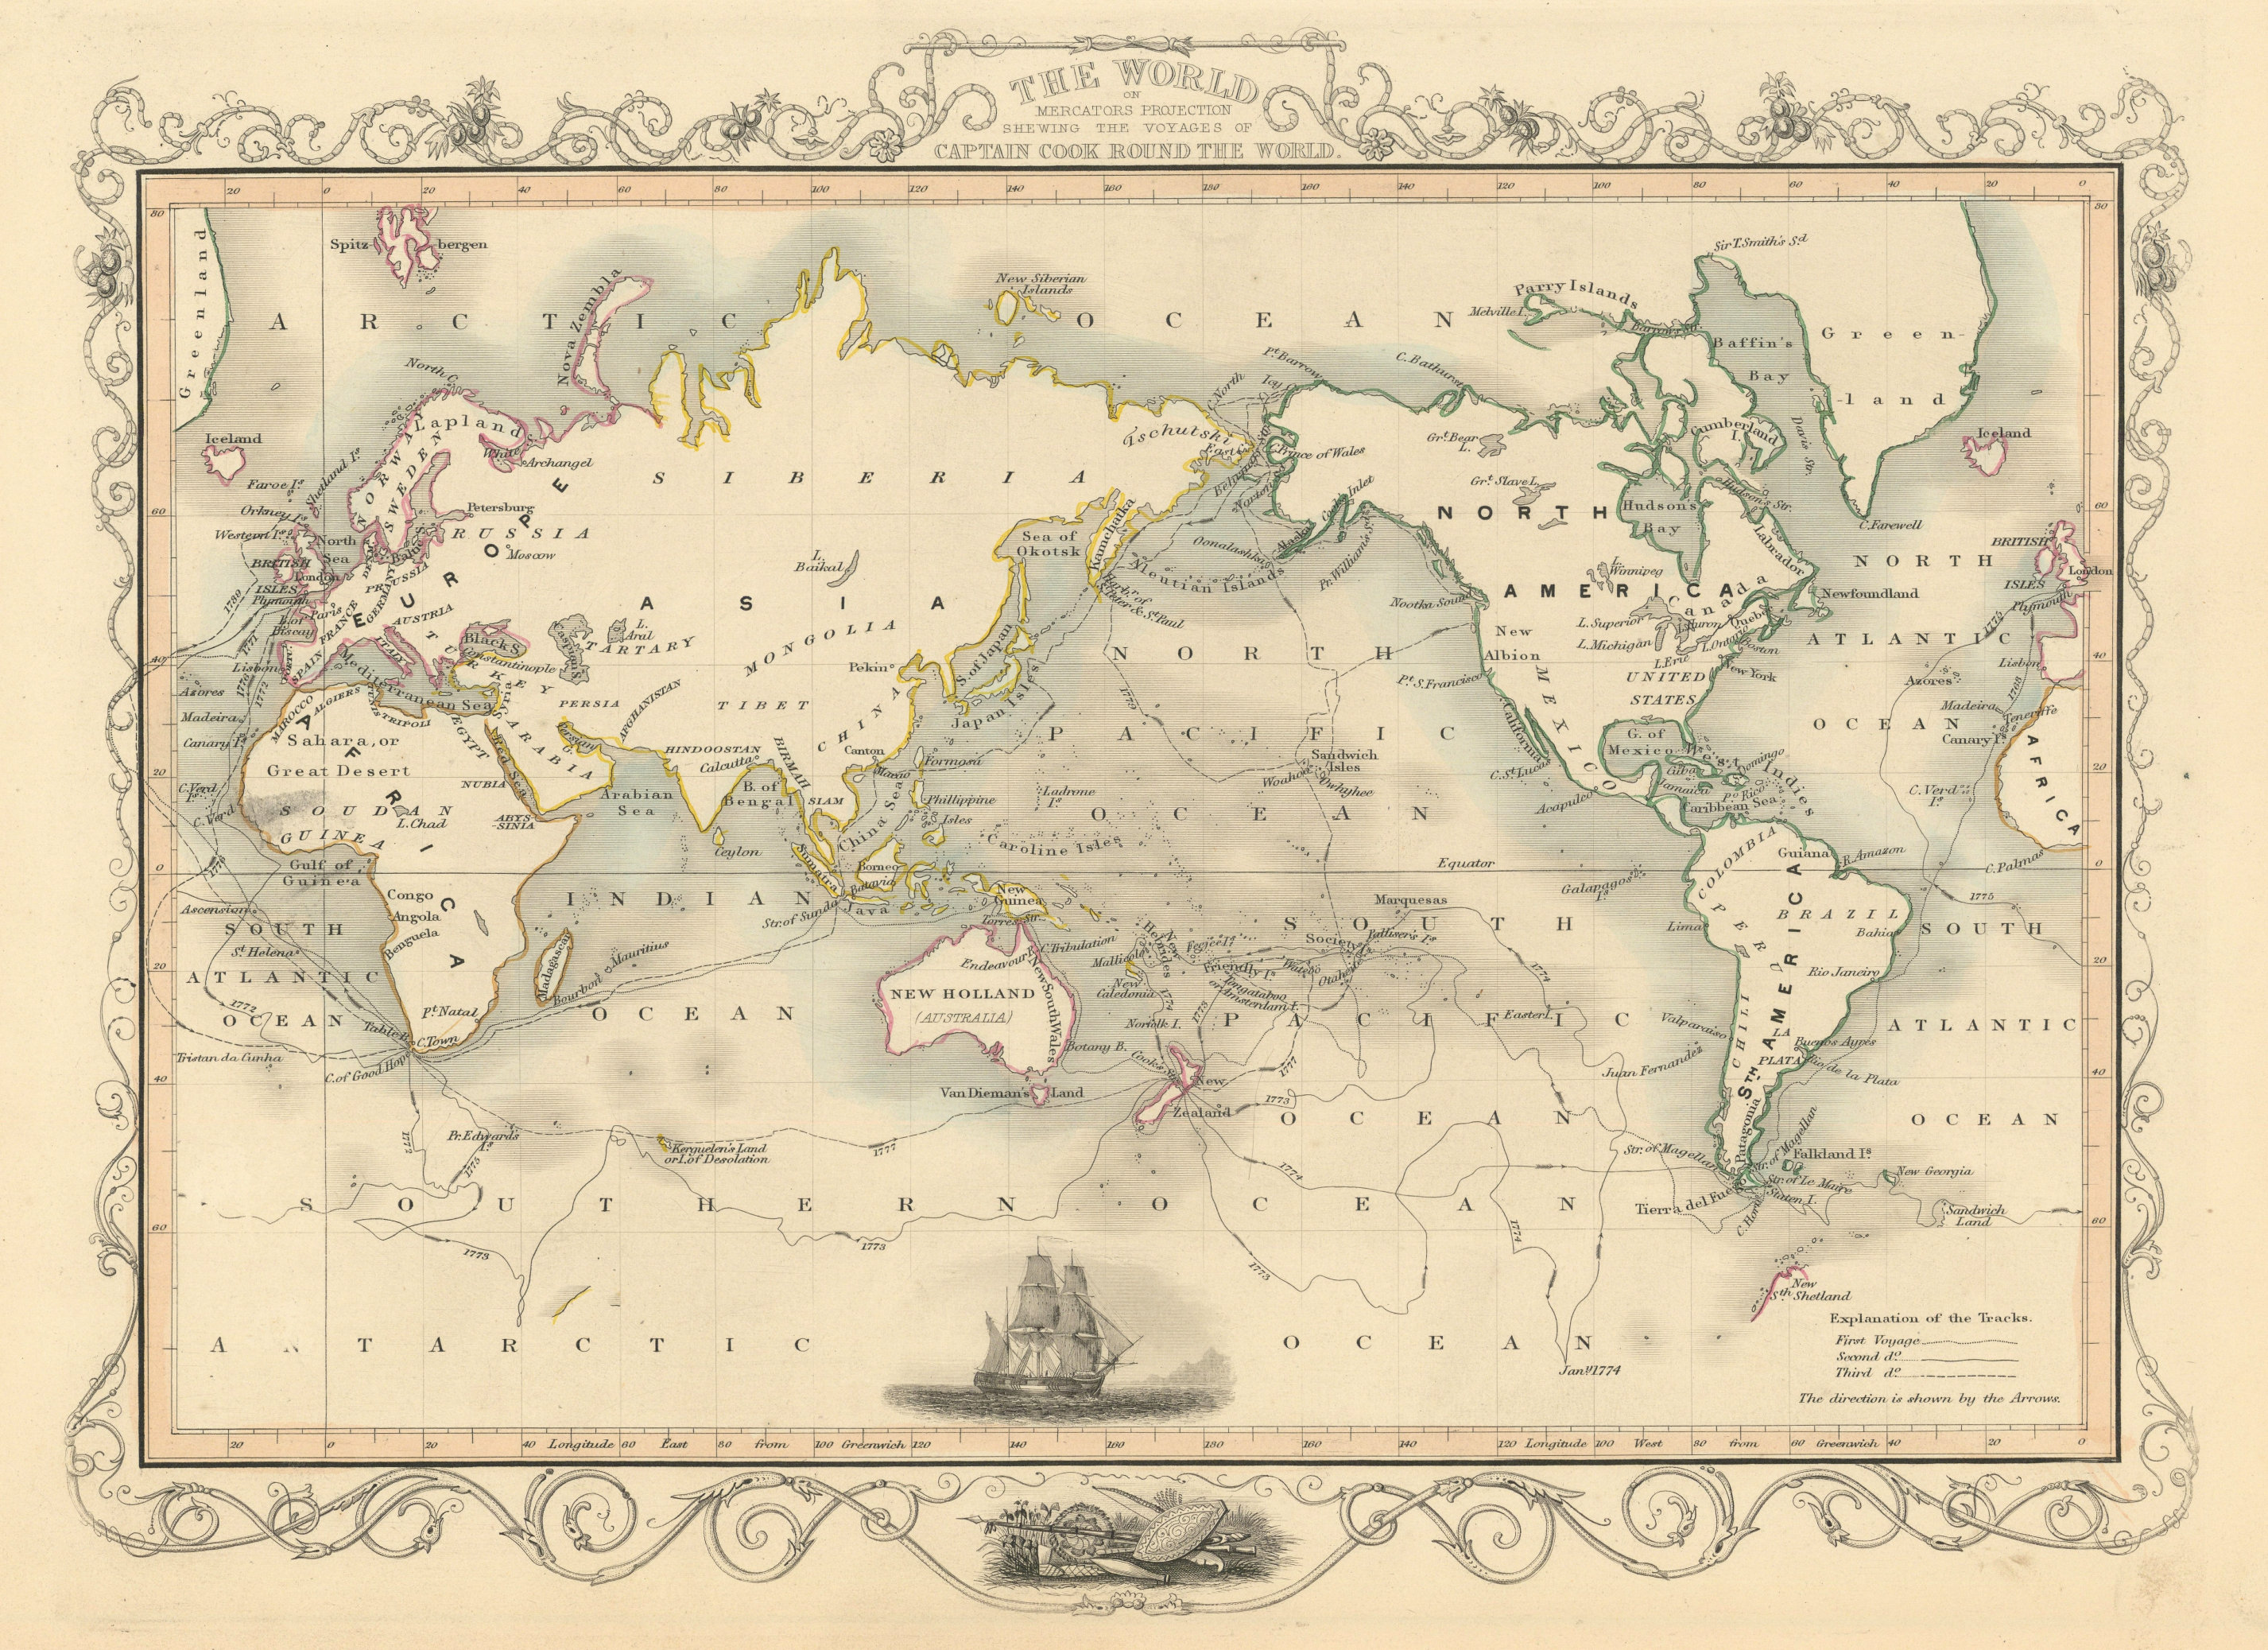 Associate Product THE WORLD. 'Shewing the voyages of Captain Cook'. TALLIS/RAPKIN 1851 old map